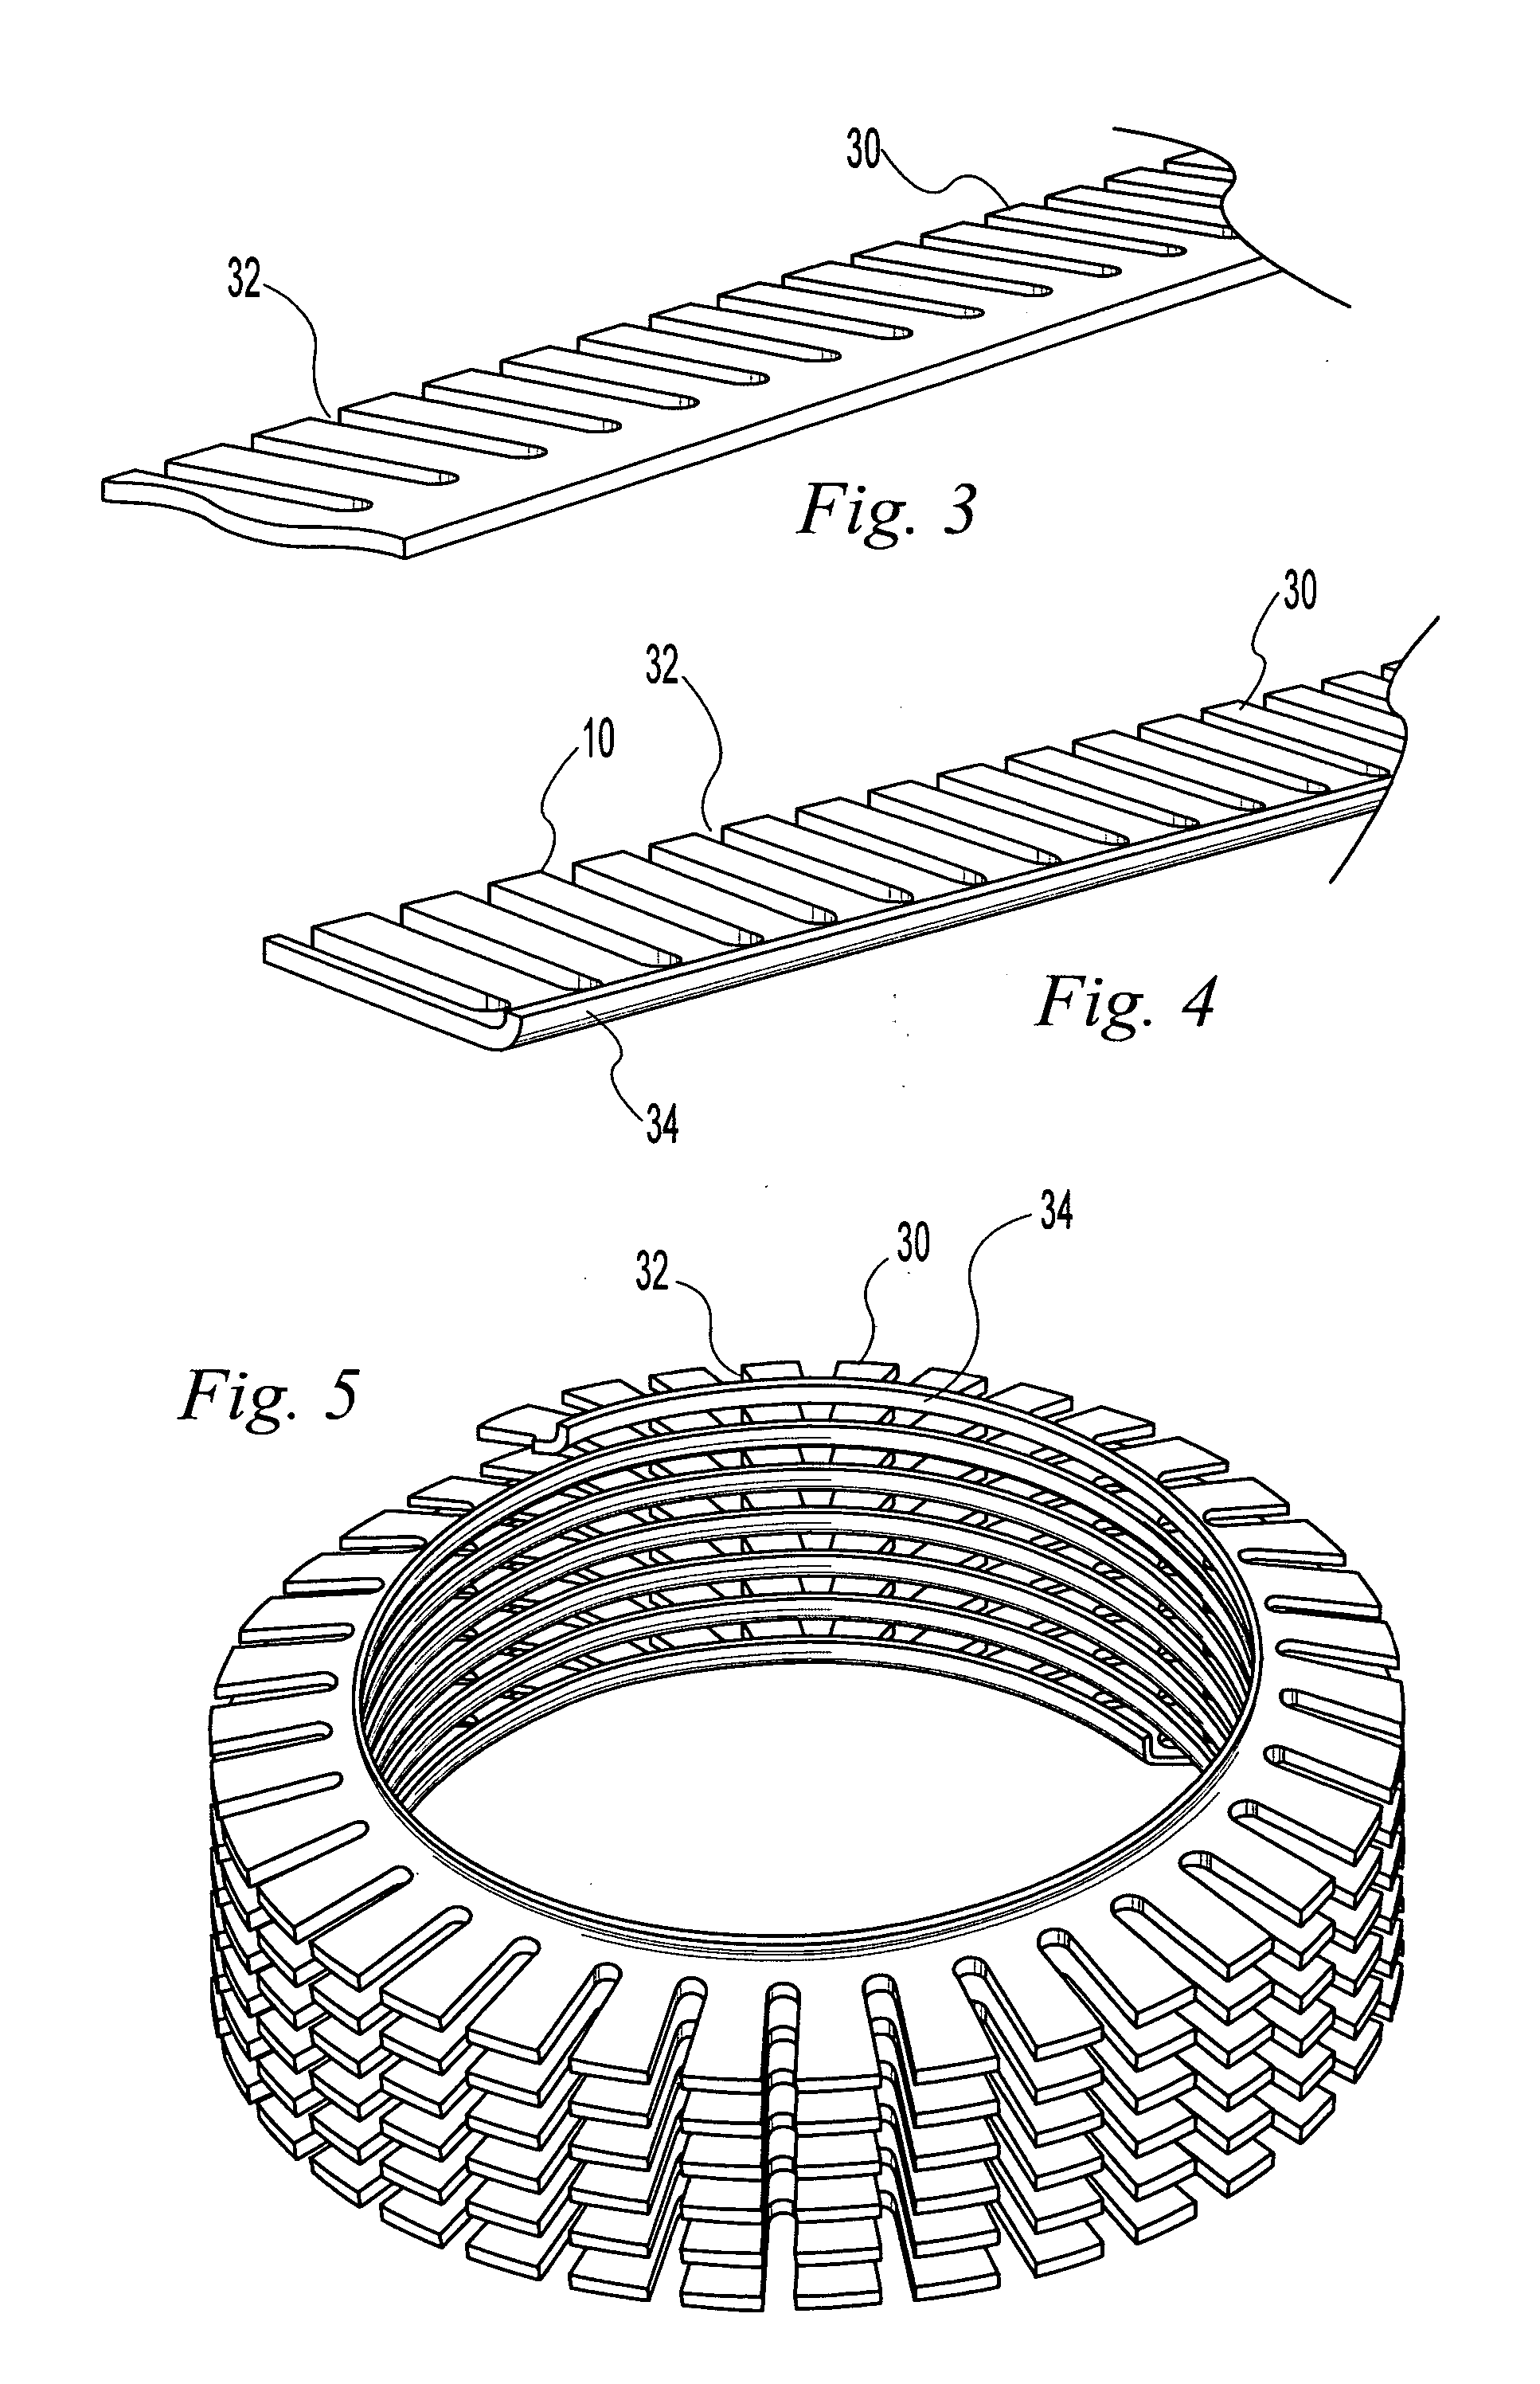 Heat exchanger fins and method for fabricating fins particularly suitable for stirling engines